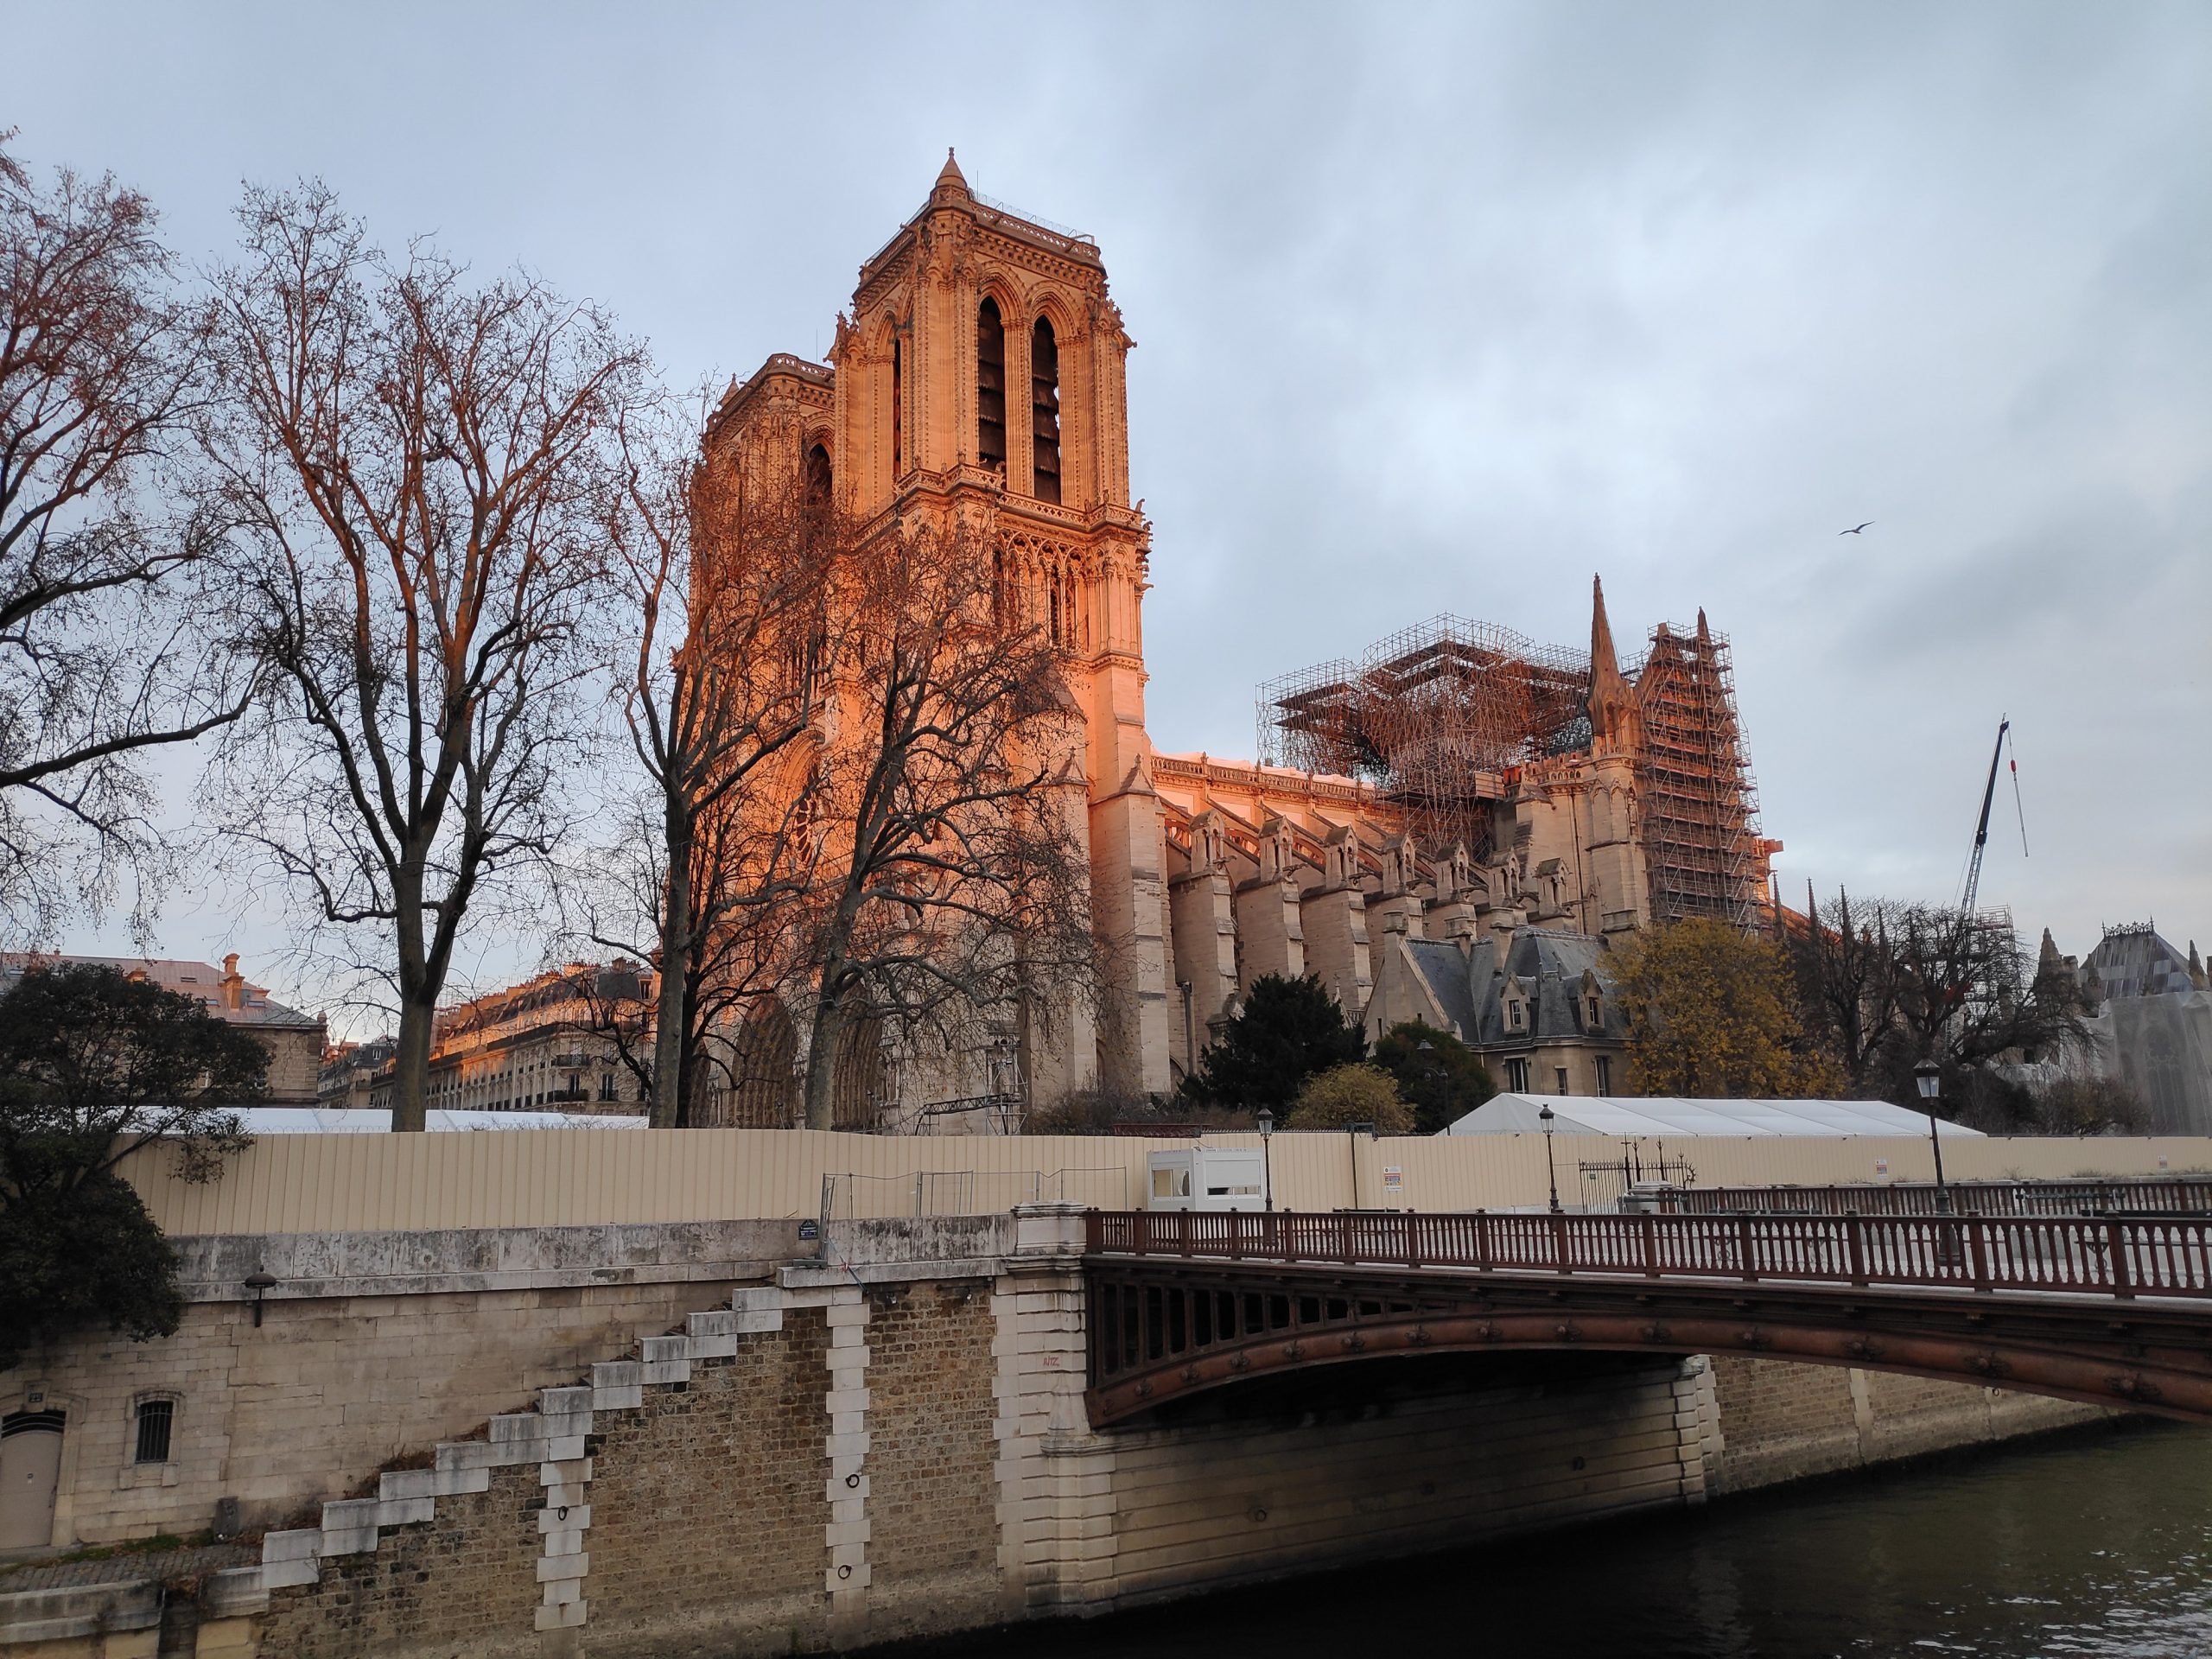 The famous Notre Damme, was located near my hotel. Despite being closed up for tourists, it still attracted many curious looks and photos